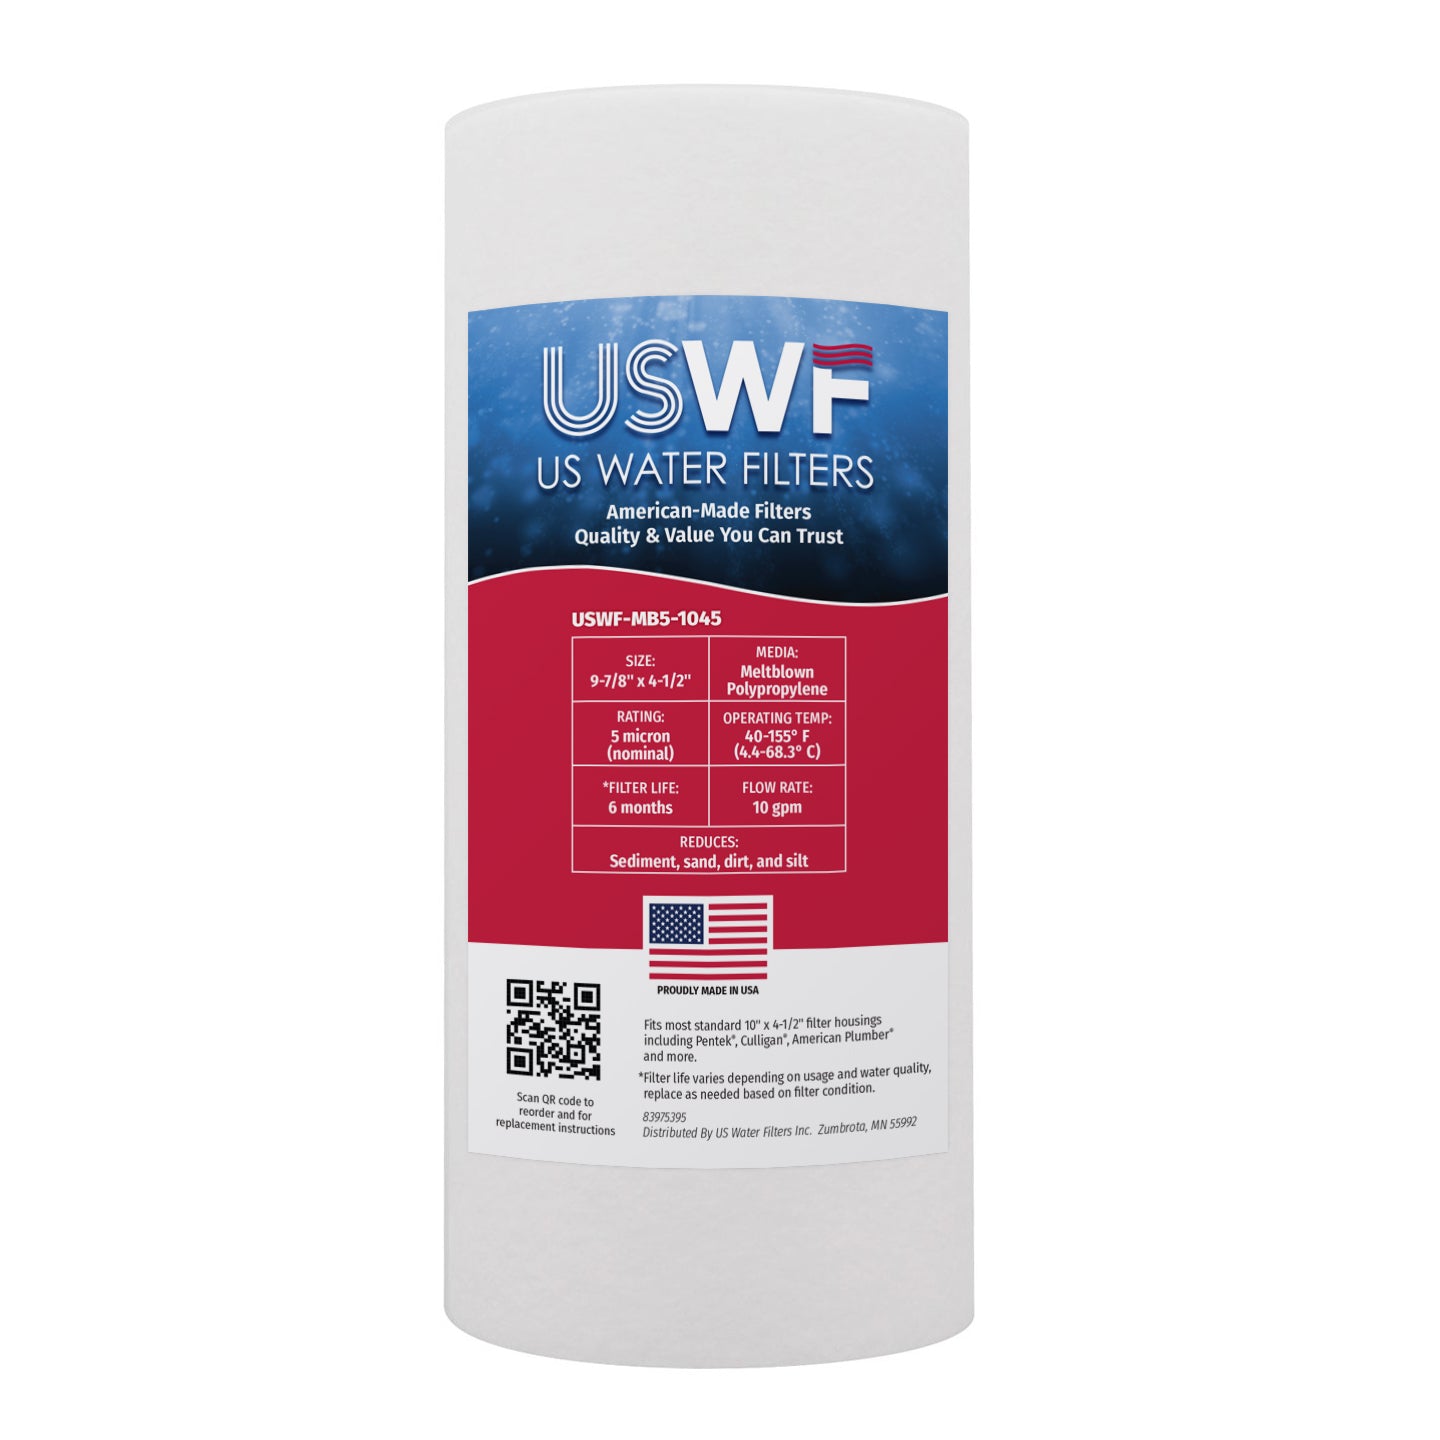 2-Stage CTO(Chlorine Taste and Odor) Reduction Whole House Water Filtration System by USWF, Sediment and CTO Reduction Carbon Block, 3/4" Inlet/Outlet